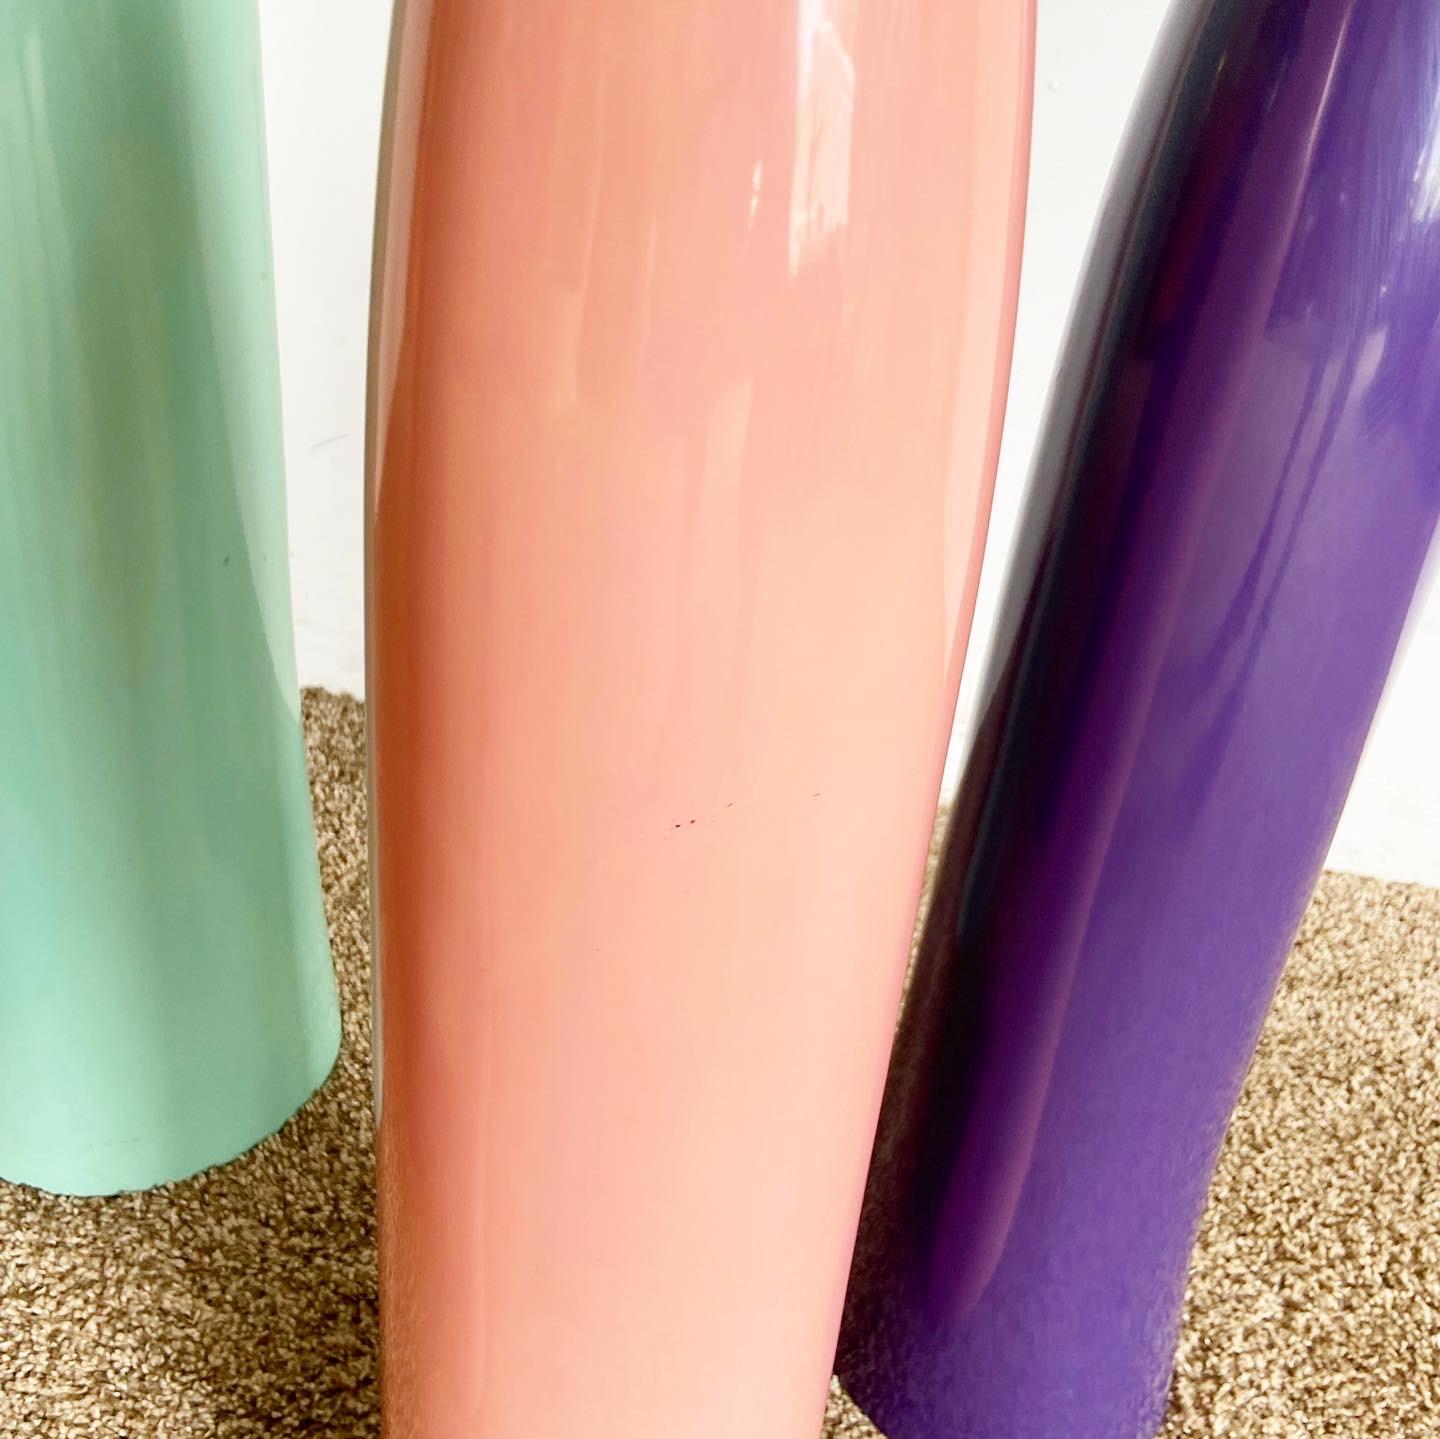 Vietnamese Postmodern Vases by Oggetti in Pink, Purple, and Teal - 6 Pieces For Sale